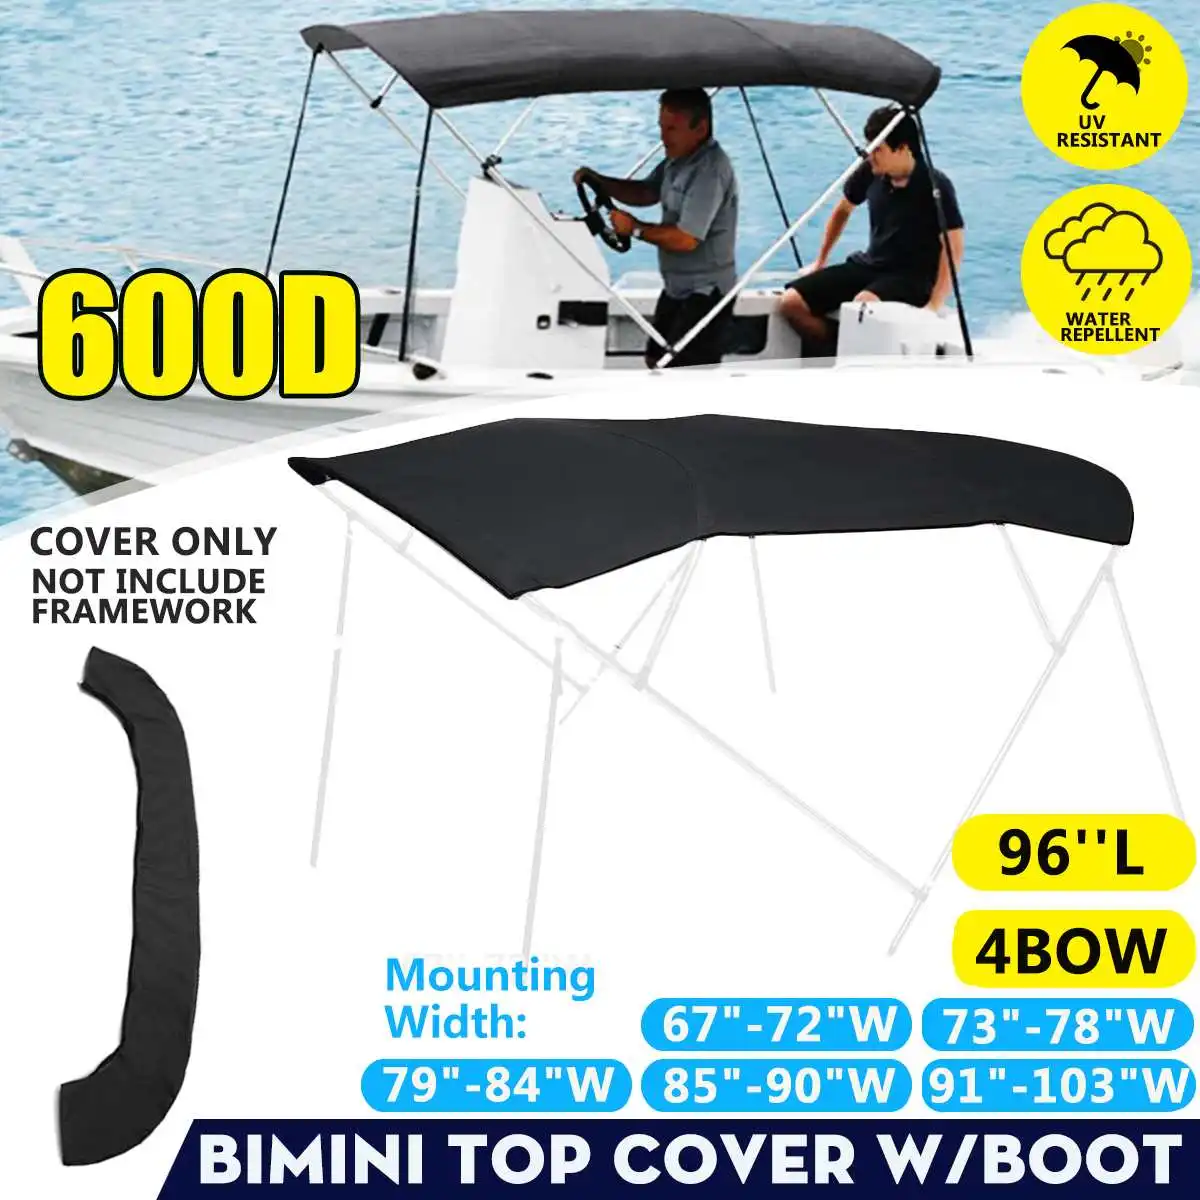 4 Bow Bimini Top Canvas Cover 600D Waterproof Anti-UV Protection Roof Canopy w/Boot Cover Storage For V-Hull Jon Boats